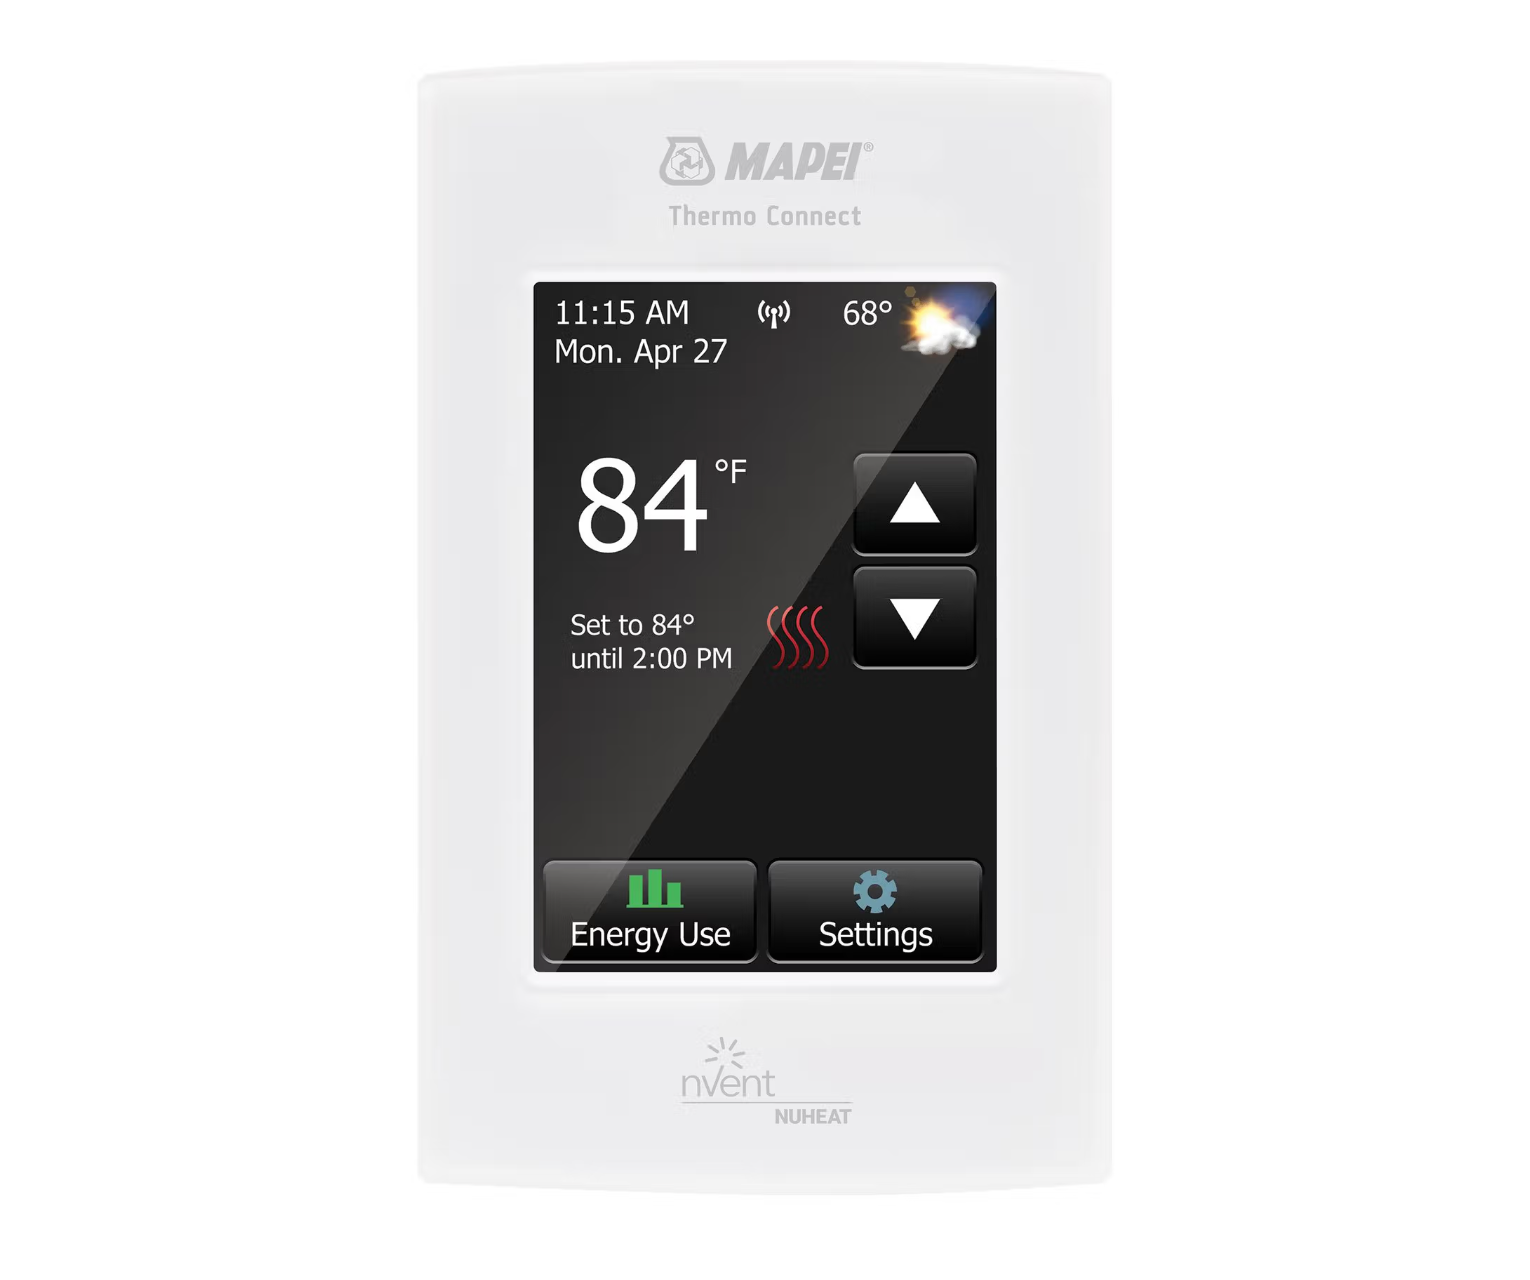 Mapei Mapeheat Thermo Connect Programmable underfloor heating thermostat with Wi-Fi technology (SKU: 2855301)